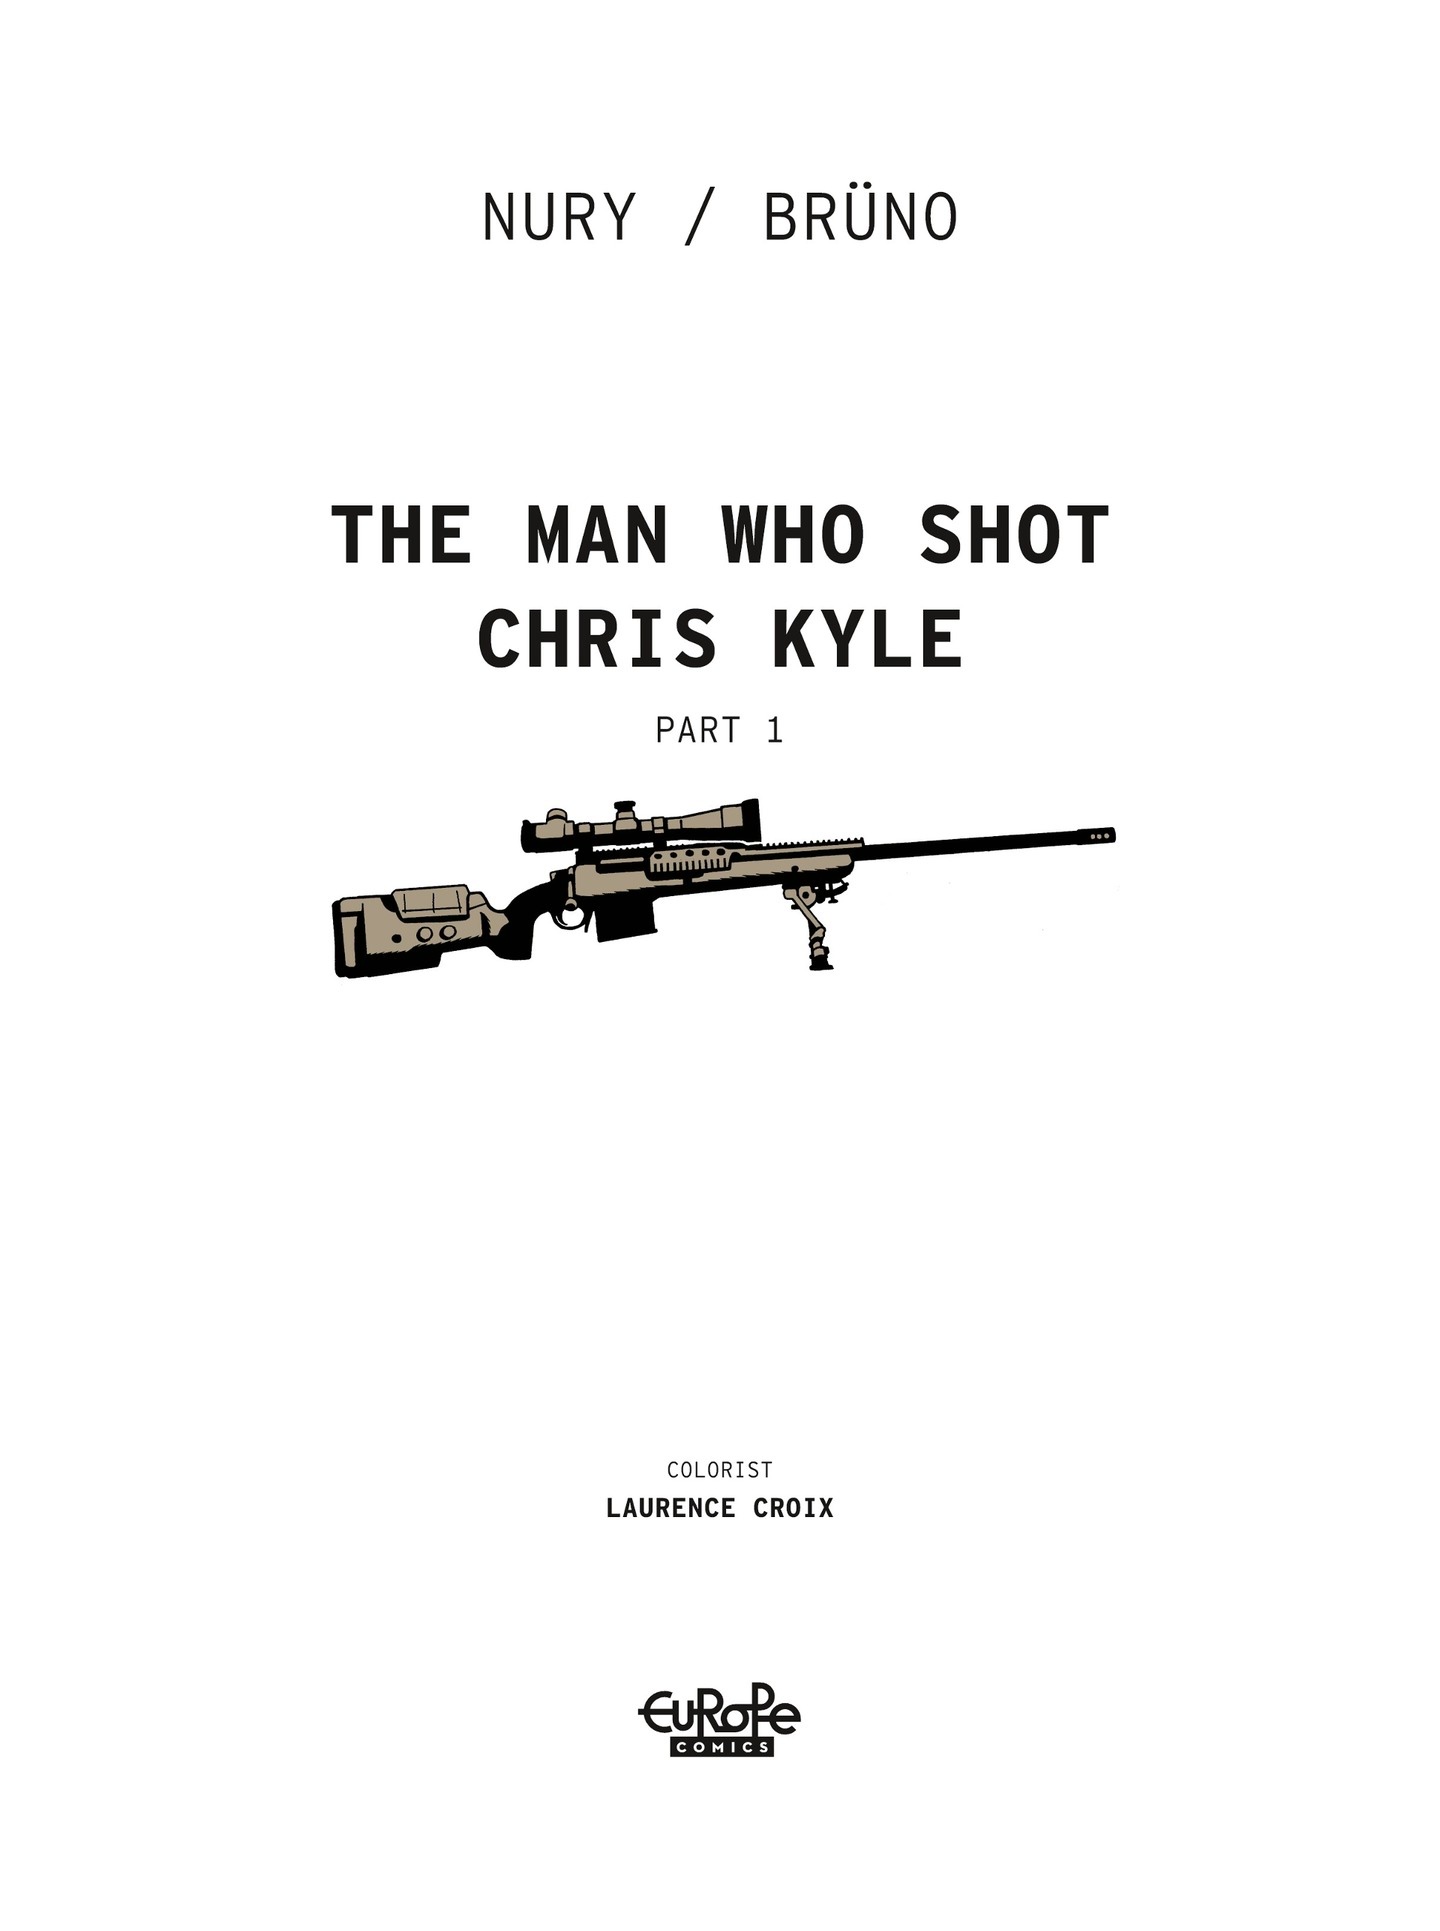 Read online The Man Who Shot Chris Kyle: An American Legend comic -  Issue # TPB 1 - 3